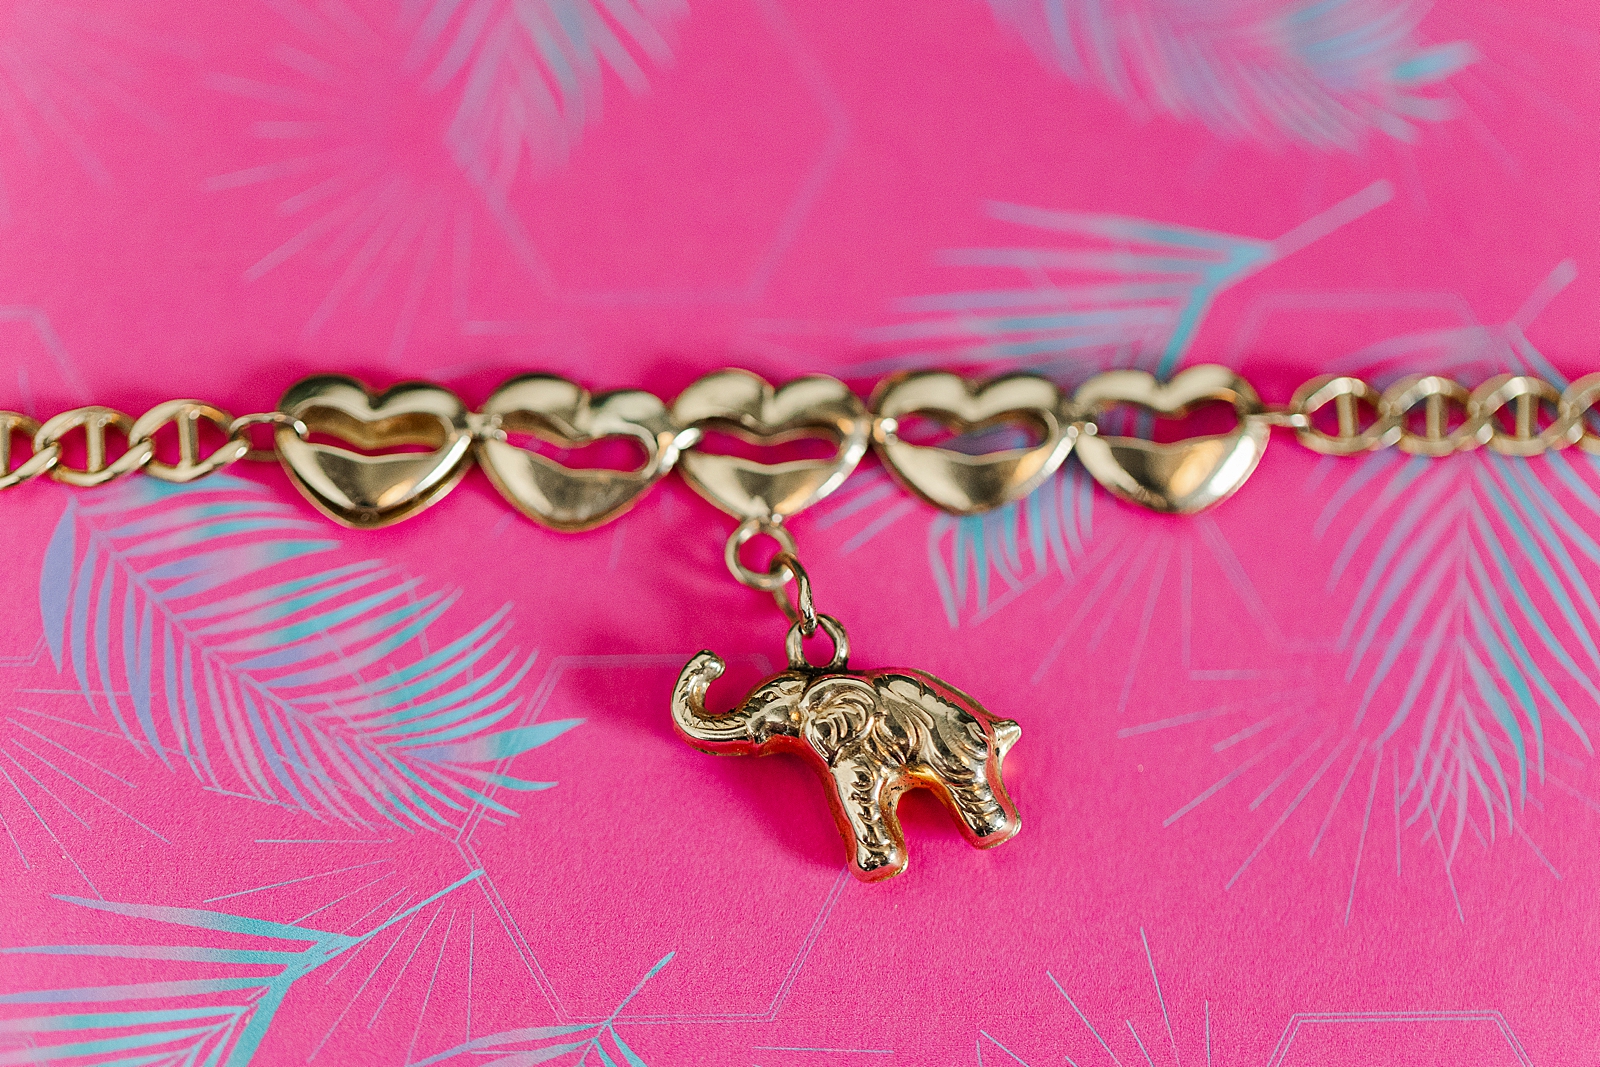 Close up shot of a gold bracelet with hearts on the bangle and an elephant charm. 